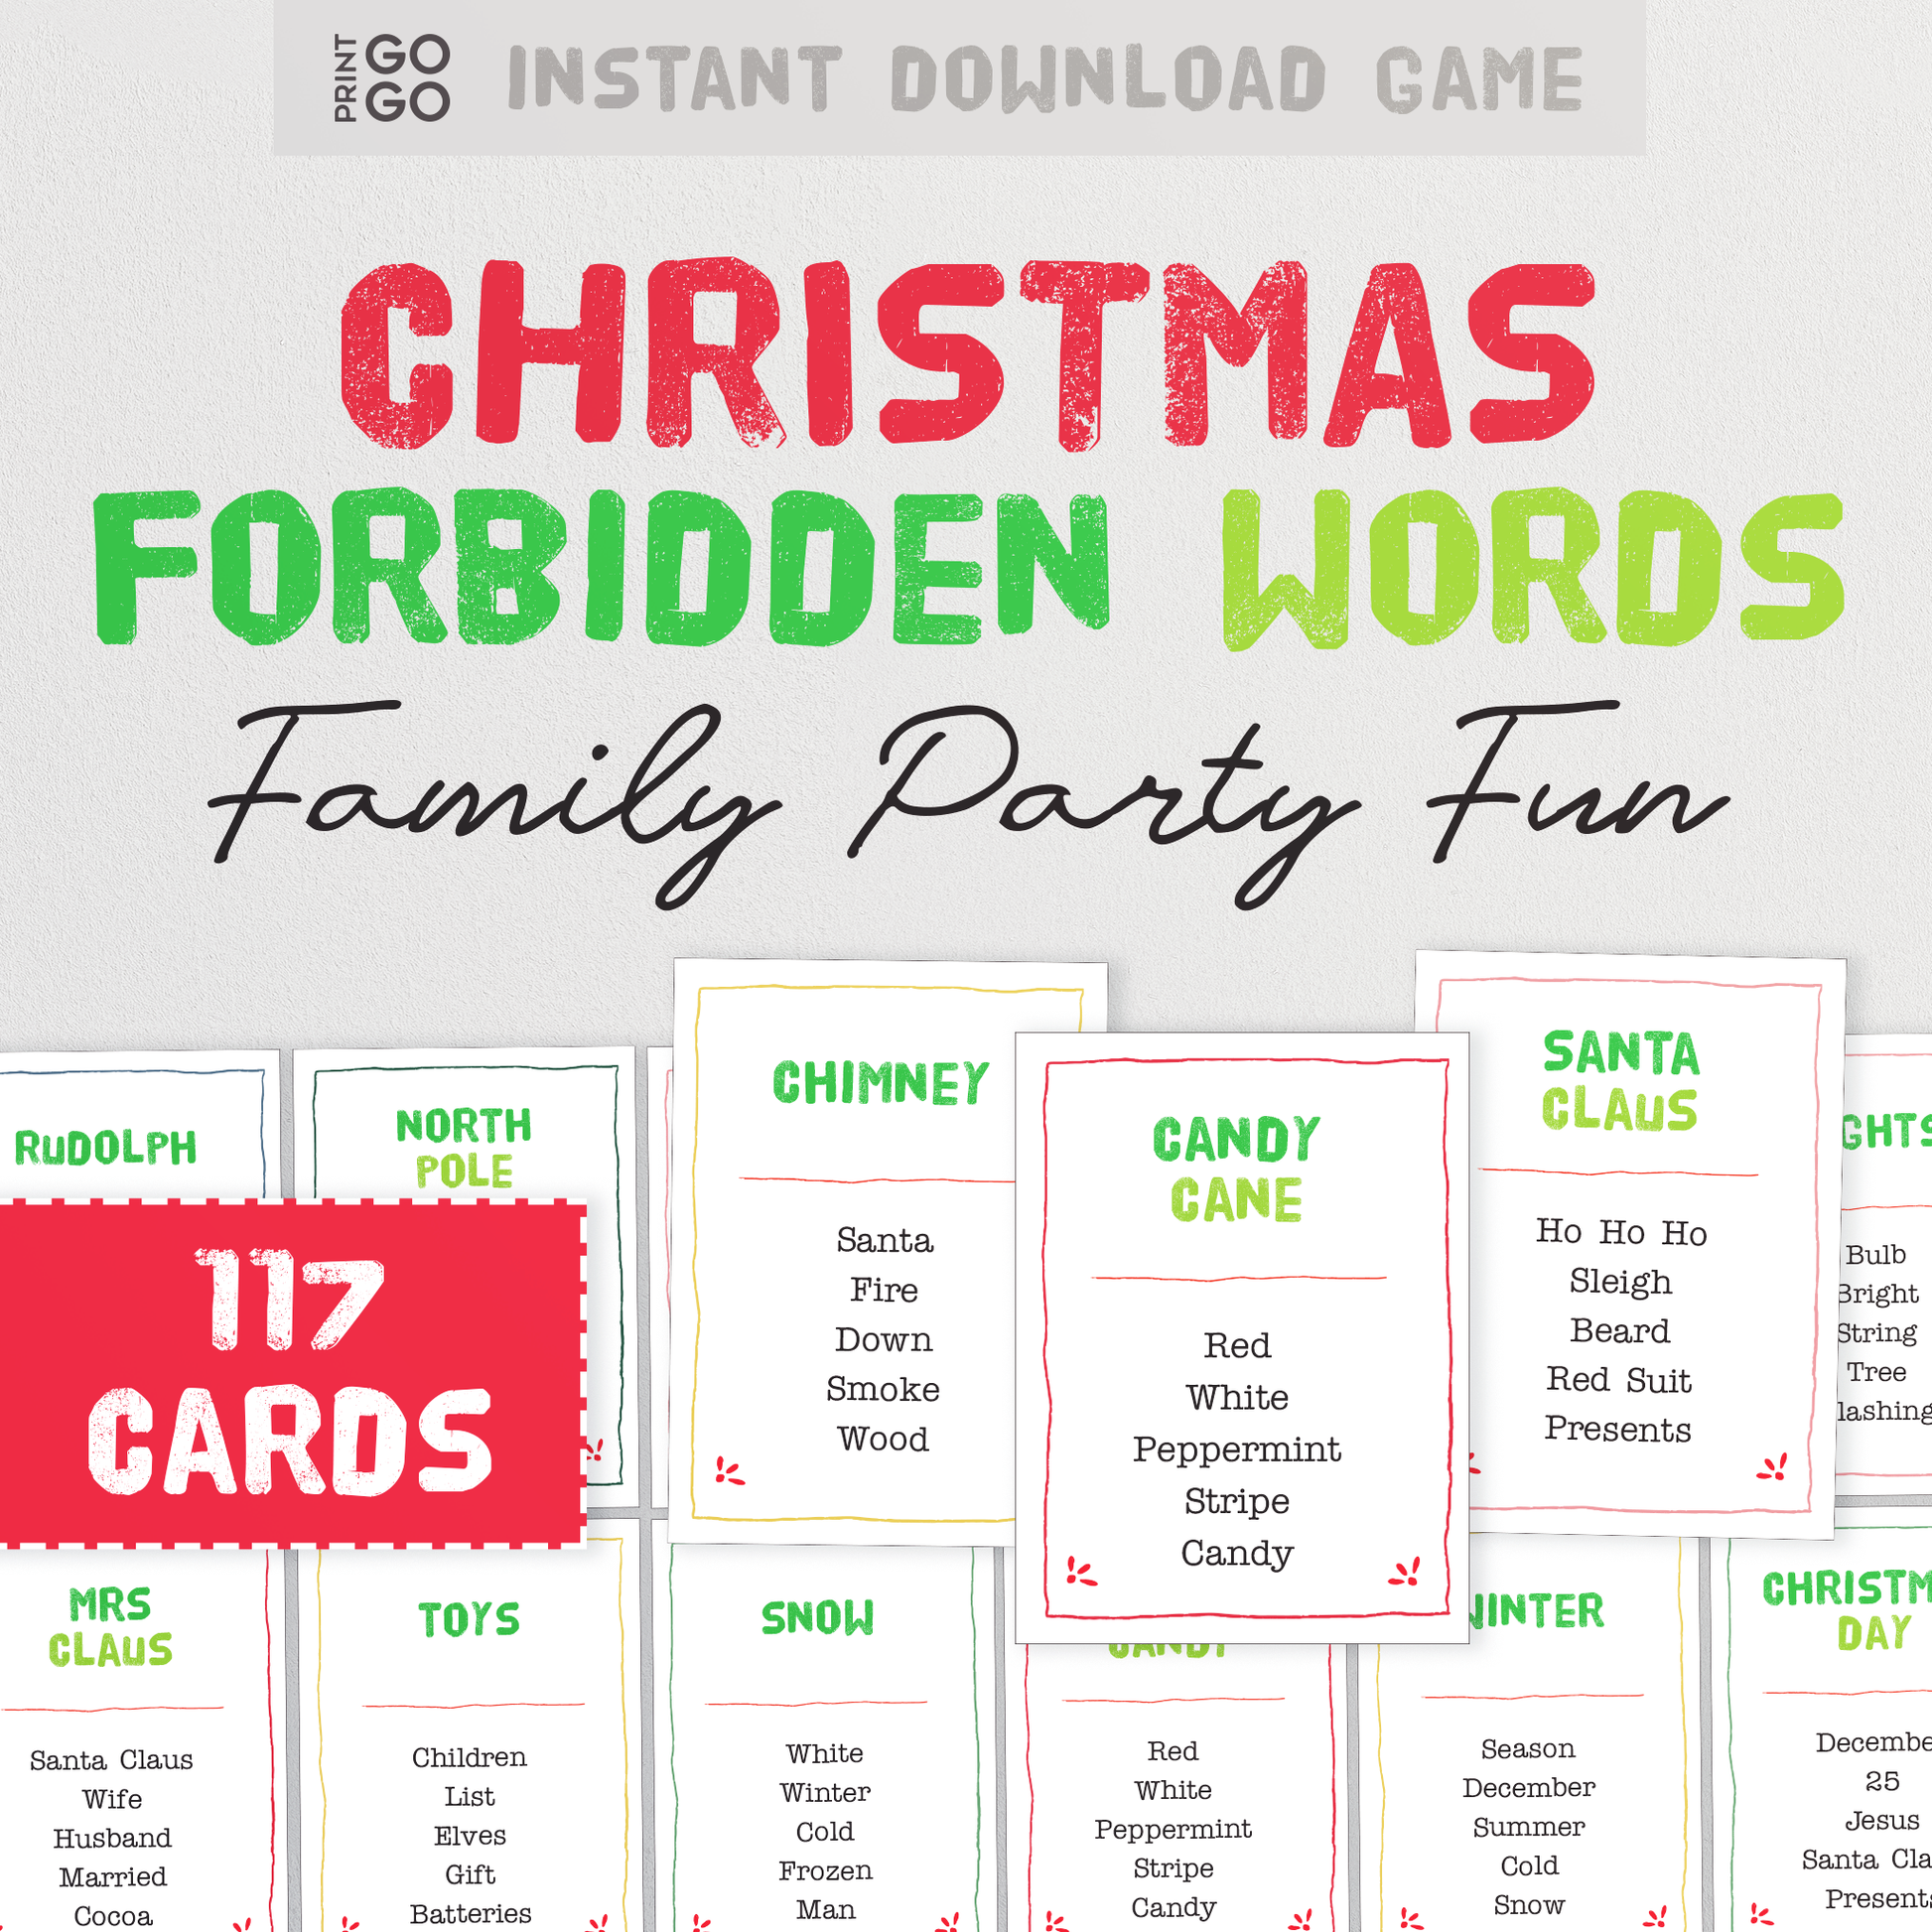 Christmas Forbidden Words - The Fun Quick Thinking Family Party Game